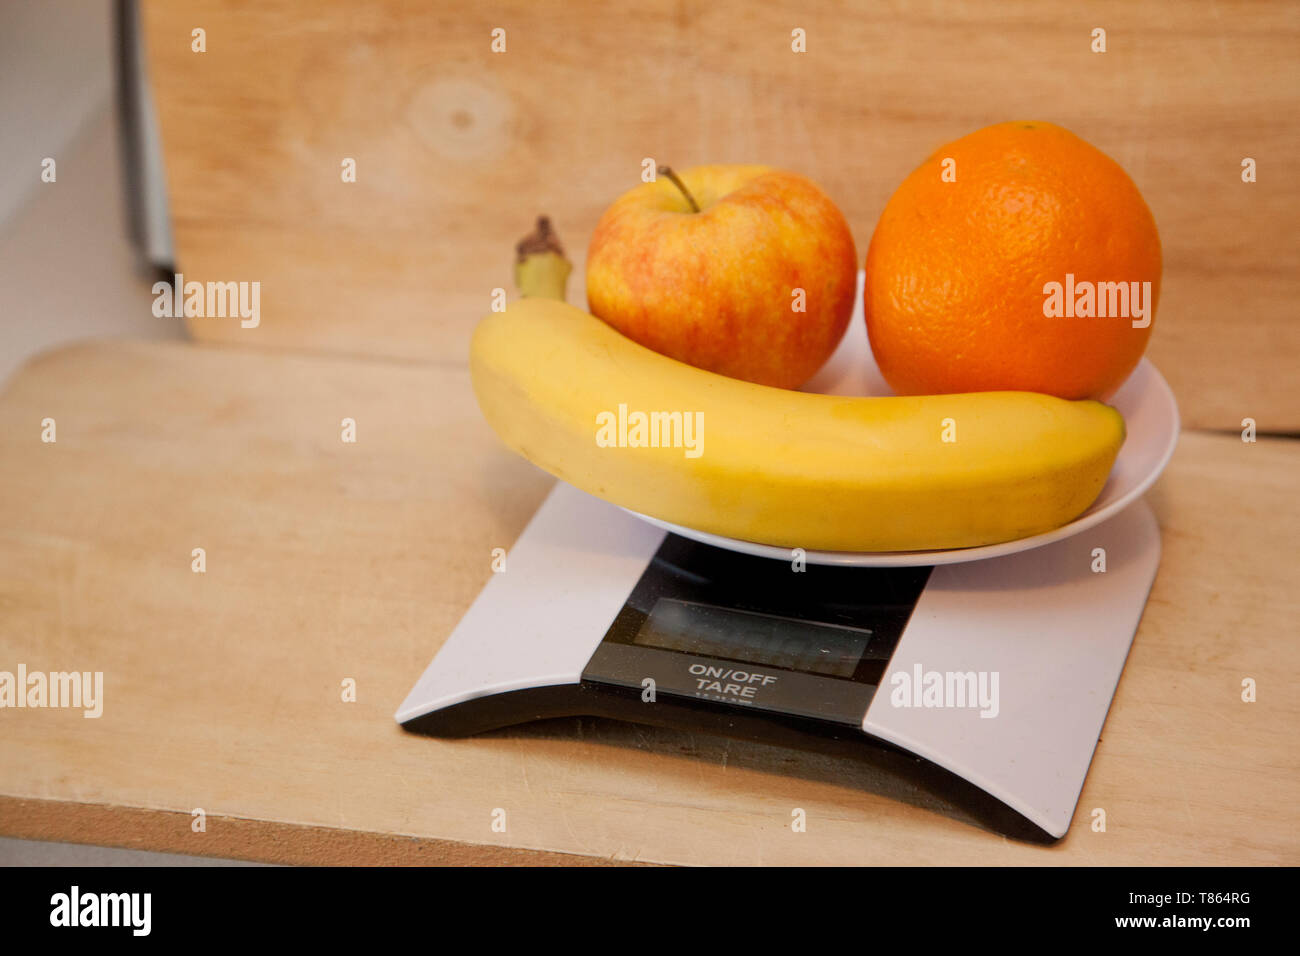 https://c8.alamy.com/comp/T864RG/an-apple-banana-and-orange-on-a-digital-scale-to-be-weighed-T864RG.jpg